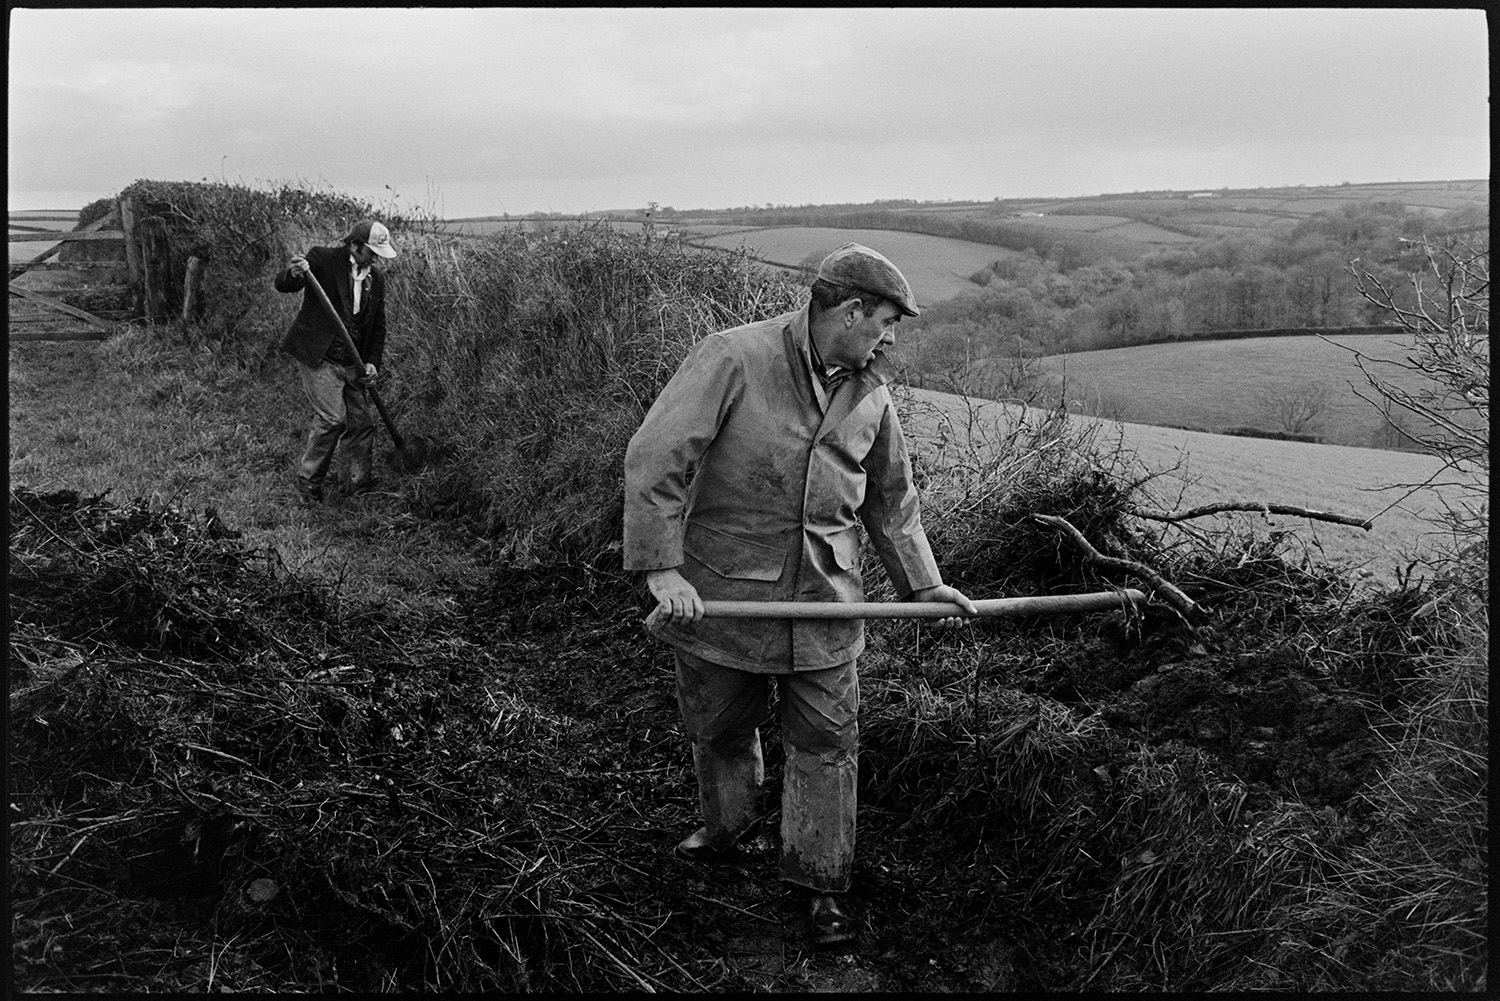 Farmers repairing hedge bank, clatting. 
[Two men clatting  a hedge (building up the hedge with turf) in a field at Narracott, Hollocombe. A landscape of fields and trees can be seen in the background.]